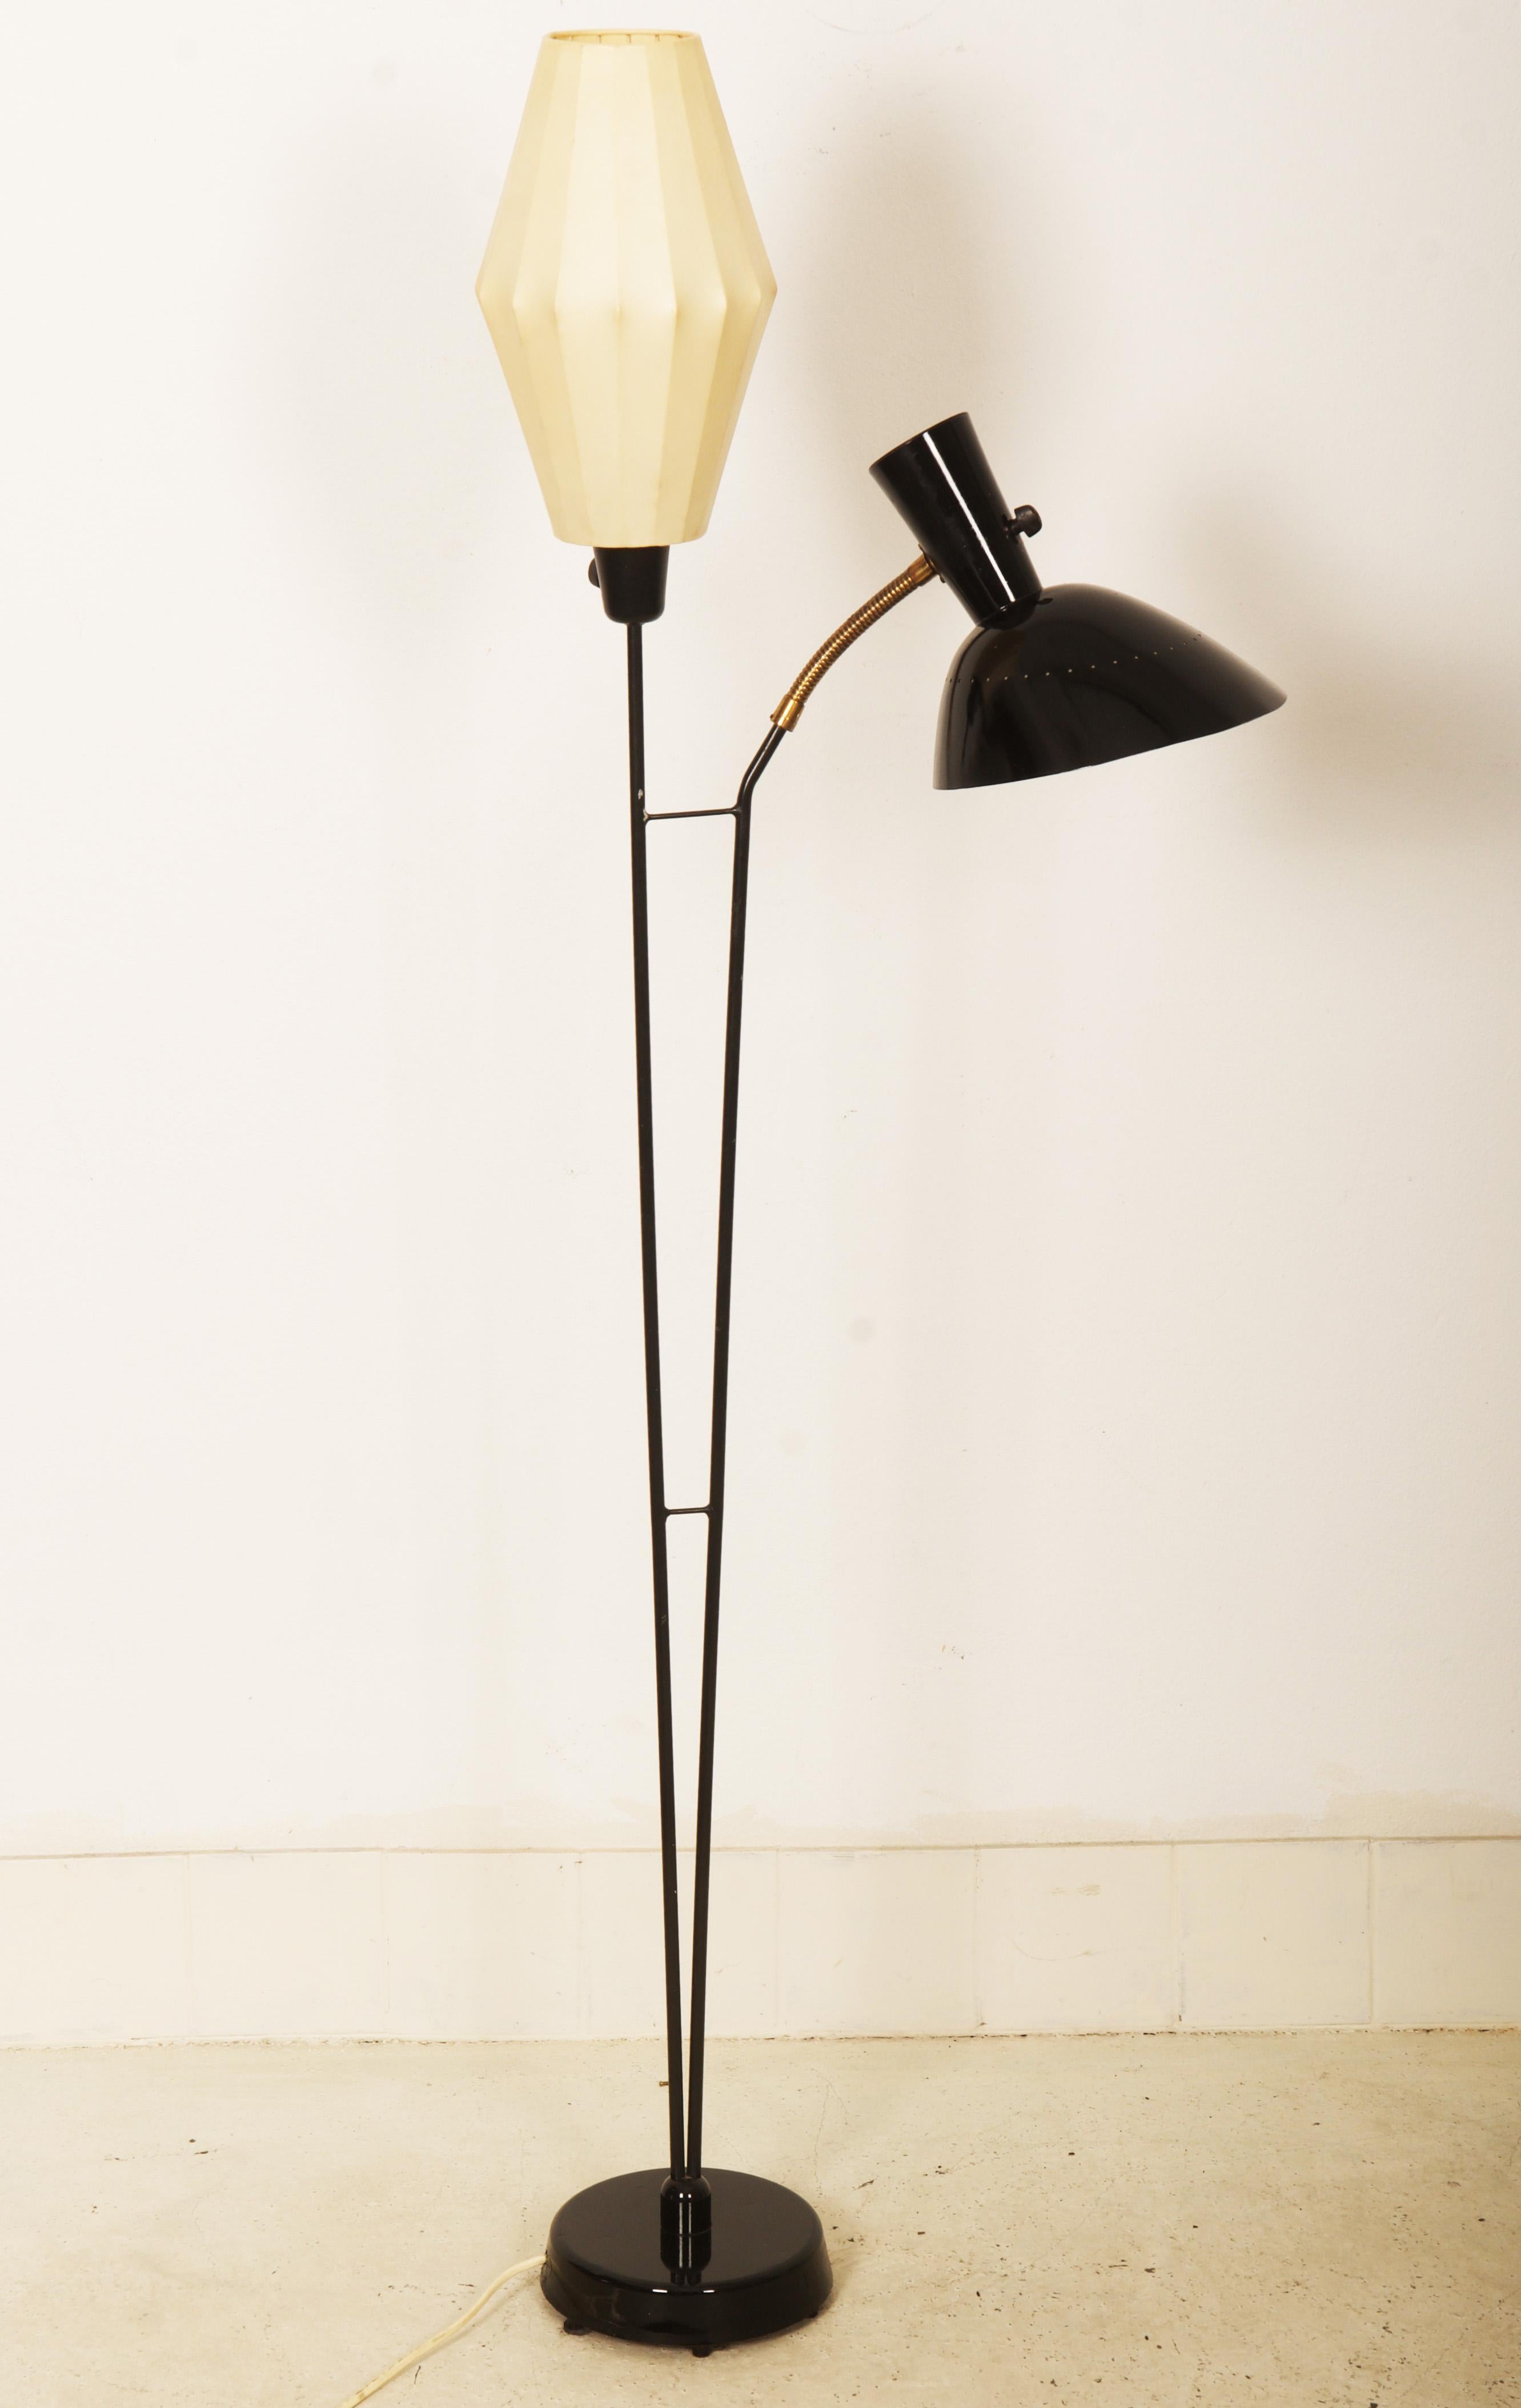 Brass frame black painted. White artificial leather shade, two light points, a flexible arm. Height 152 cm. fitted with each E27 bakelite socket. Made in Sweden in the 1950s.
two pieces available, price per lamp.